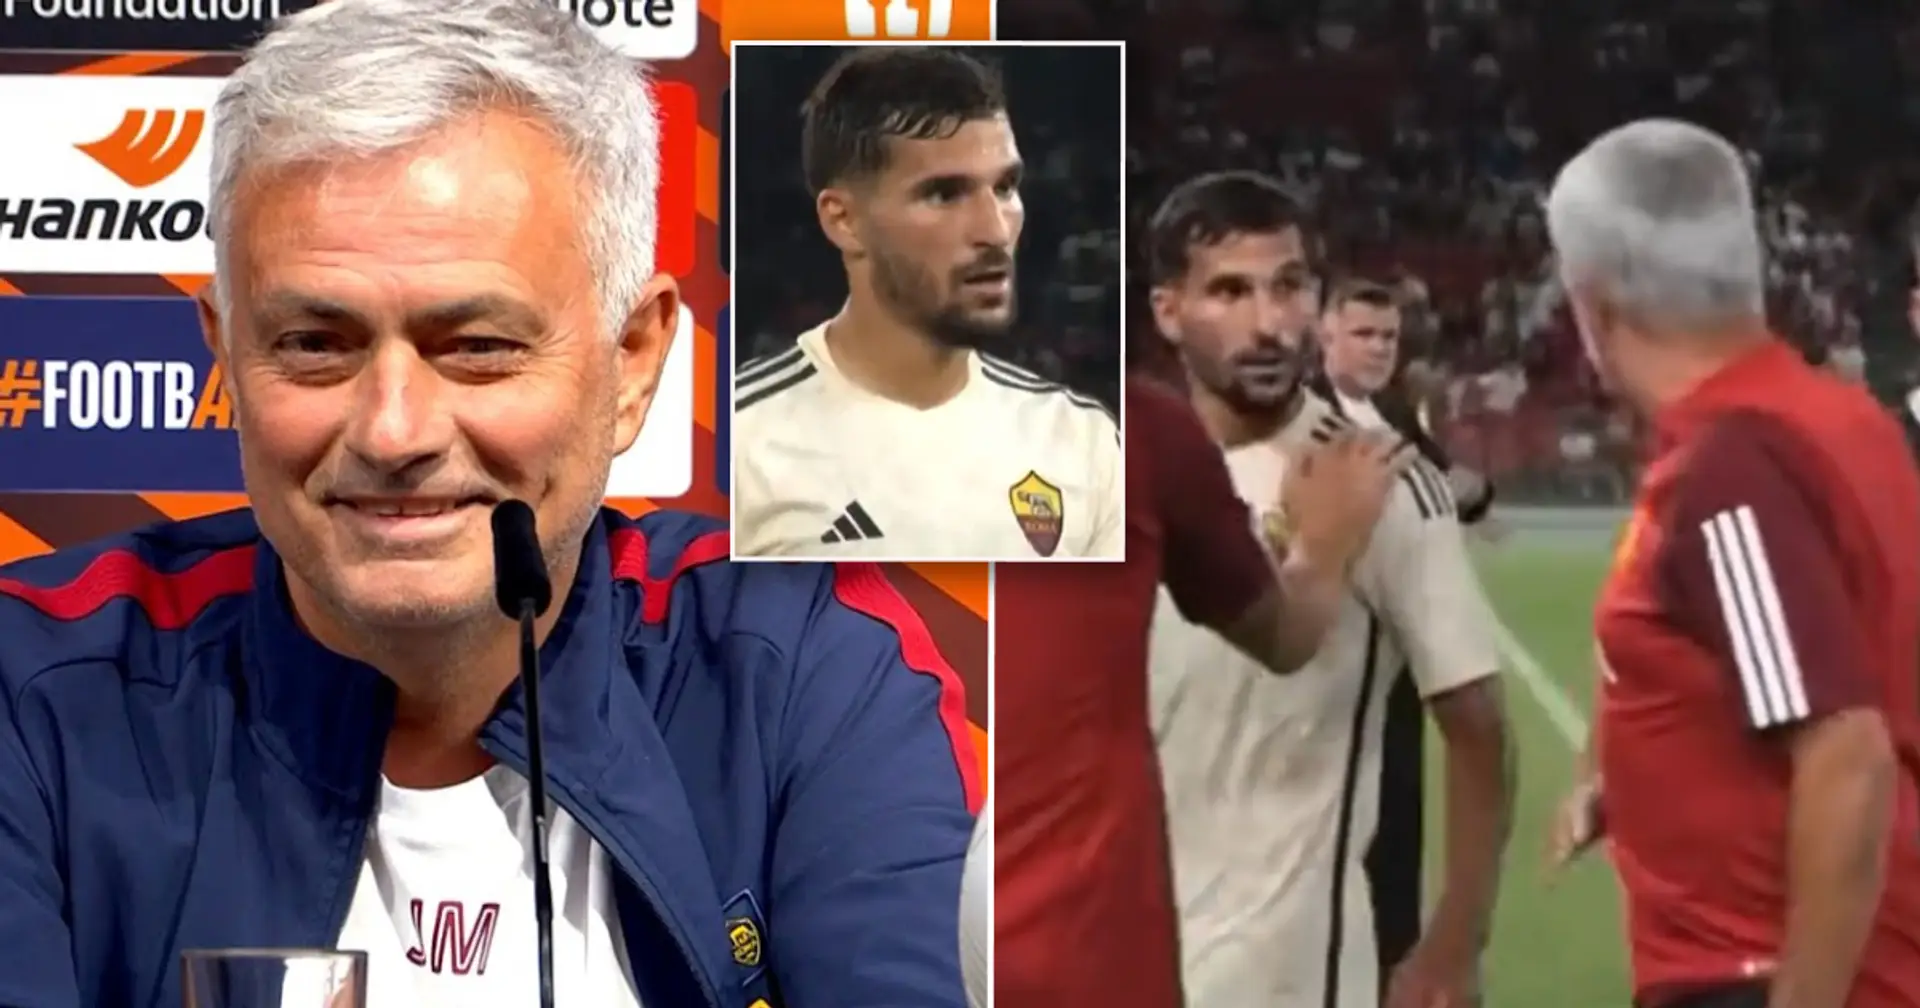 Jose Mourinho subs off Roma star to finish the game with 10 men on purpose